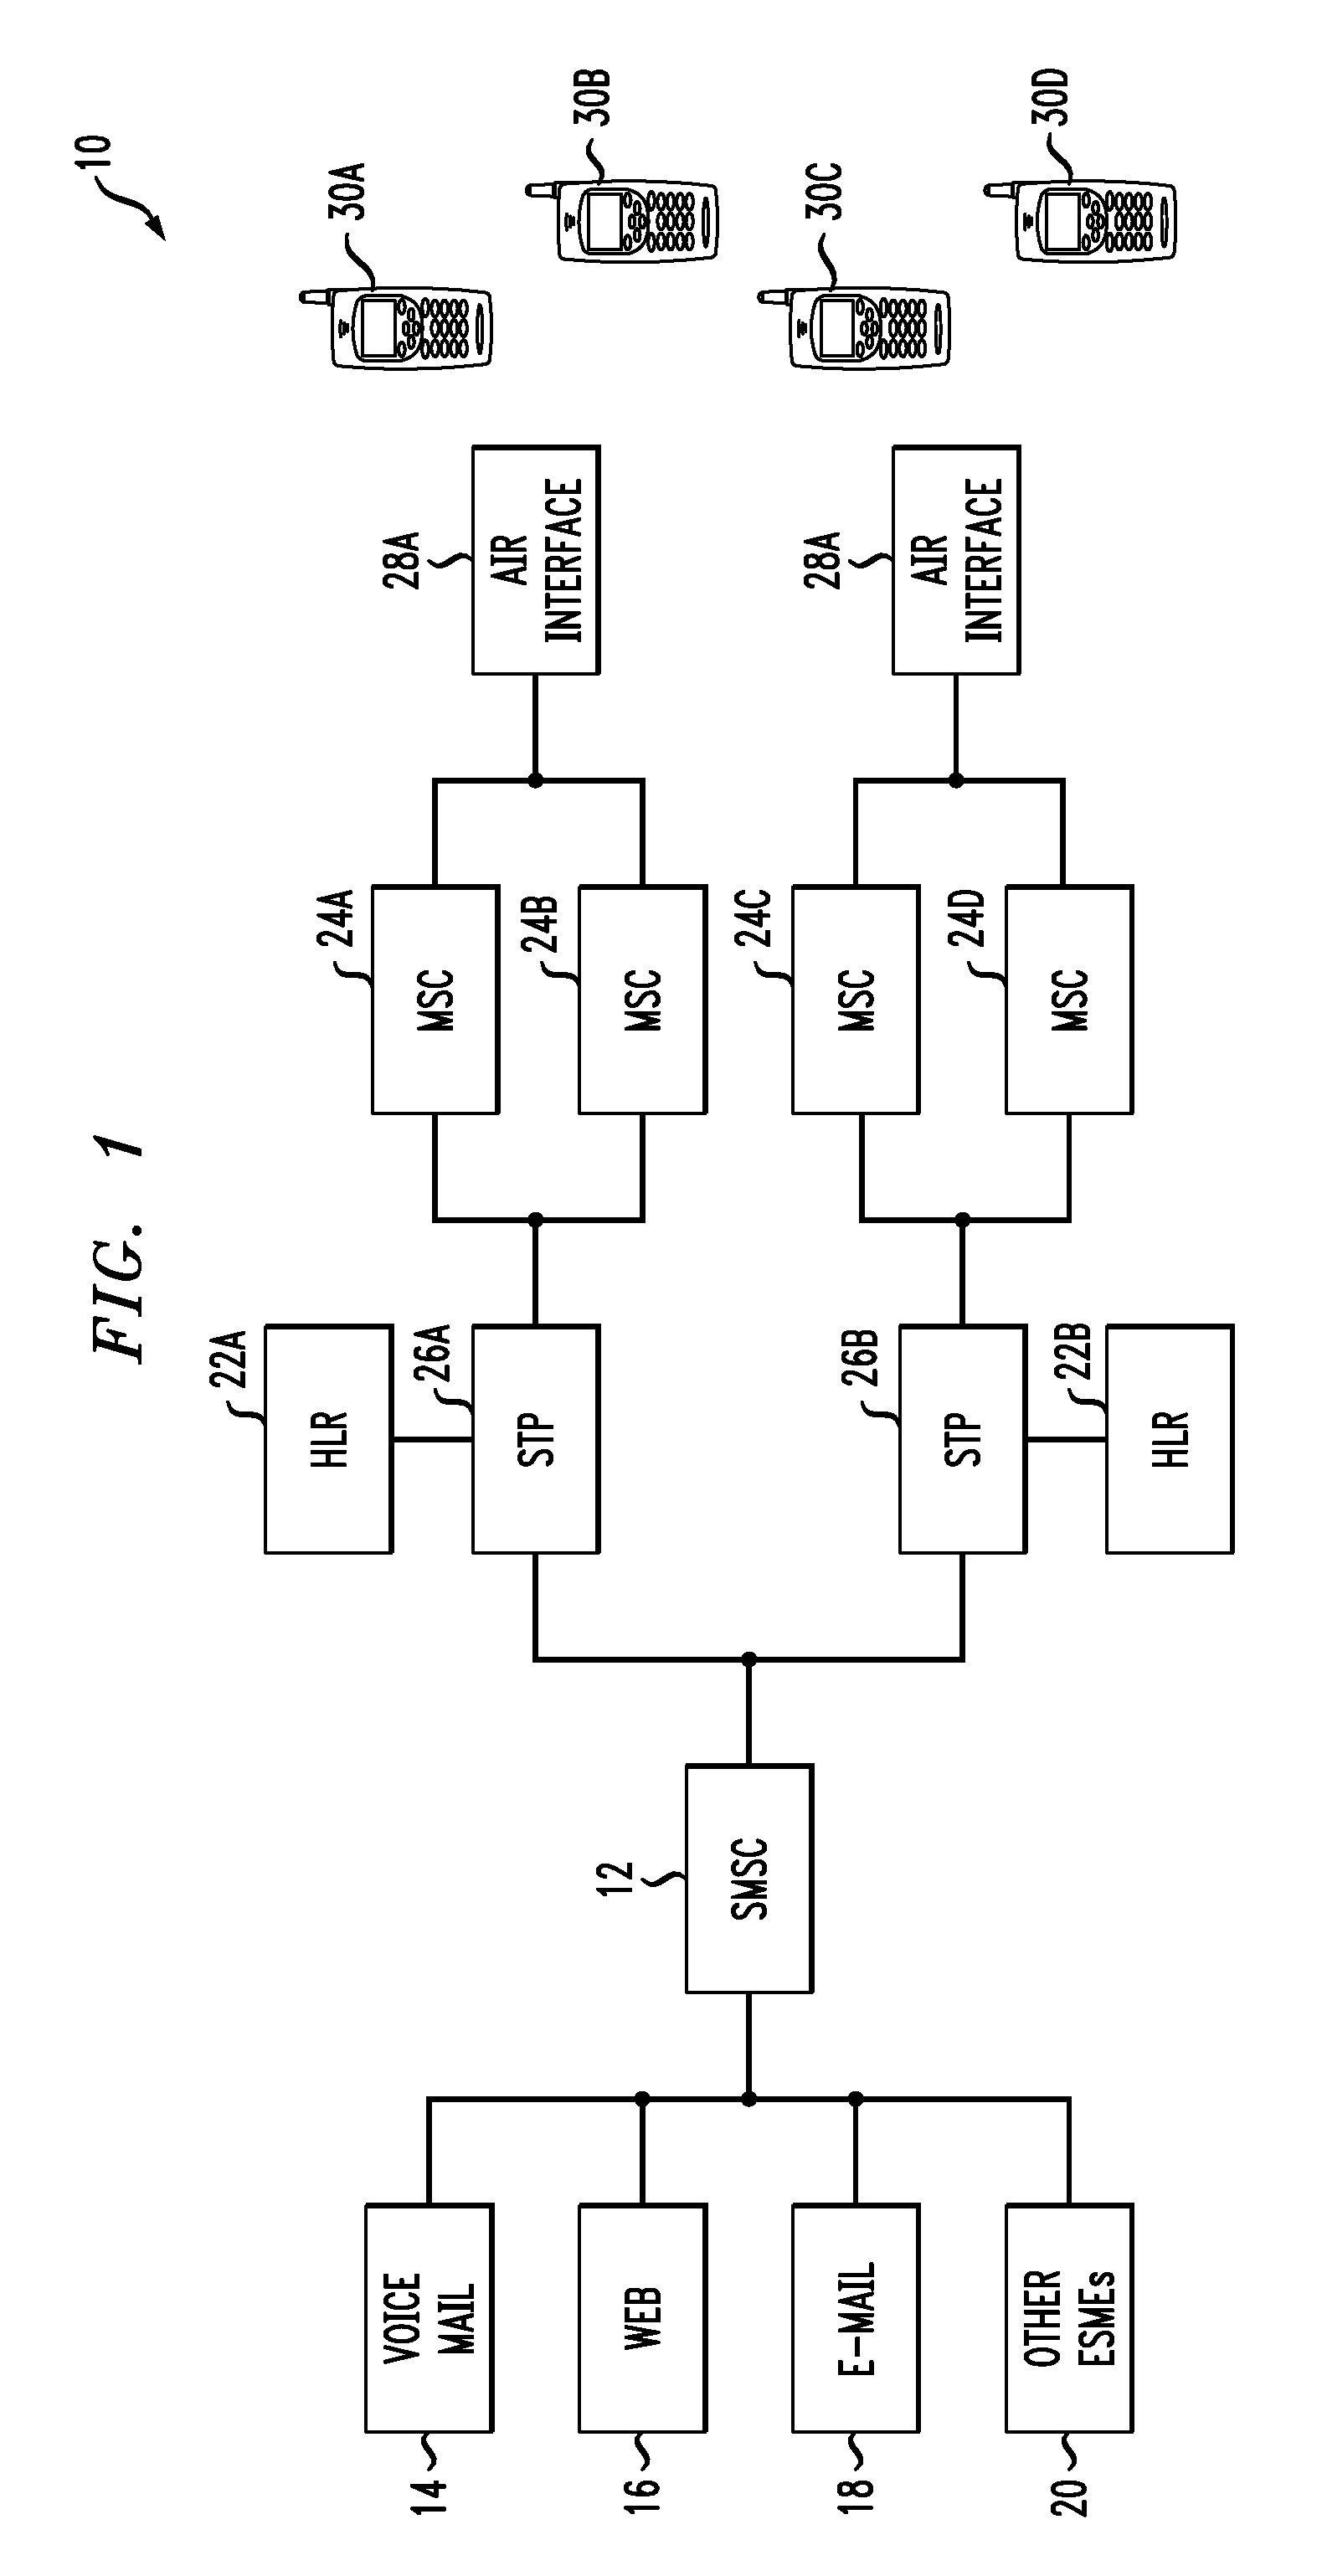 Method and apparatus for data message delivery to a recipient migrated across technology networks